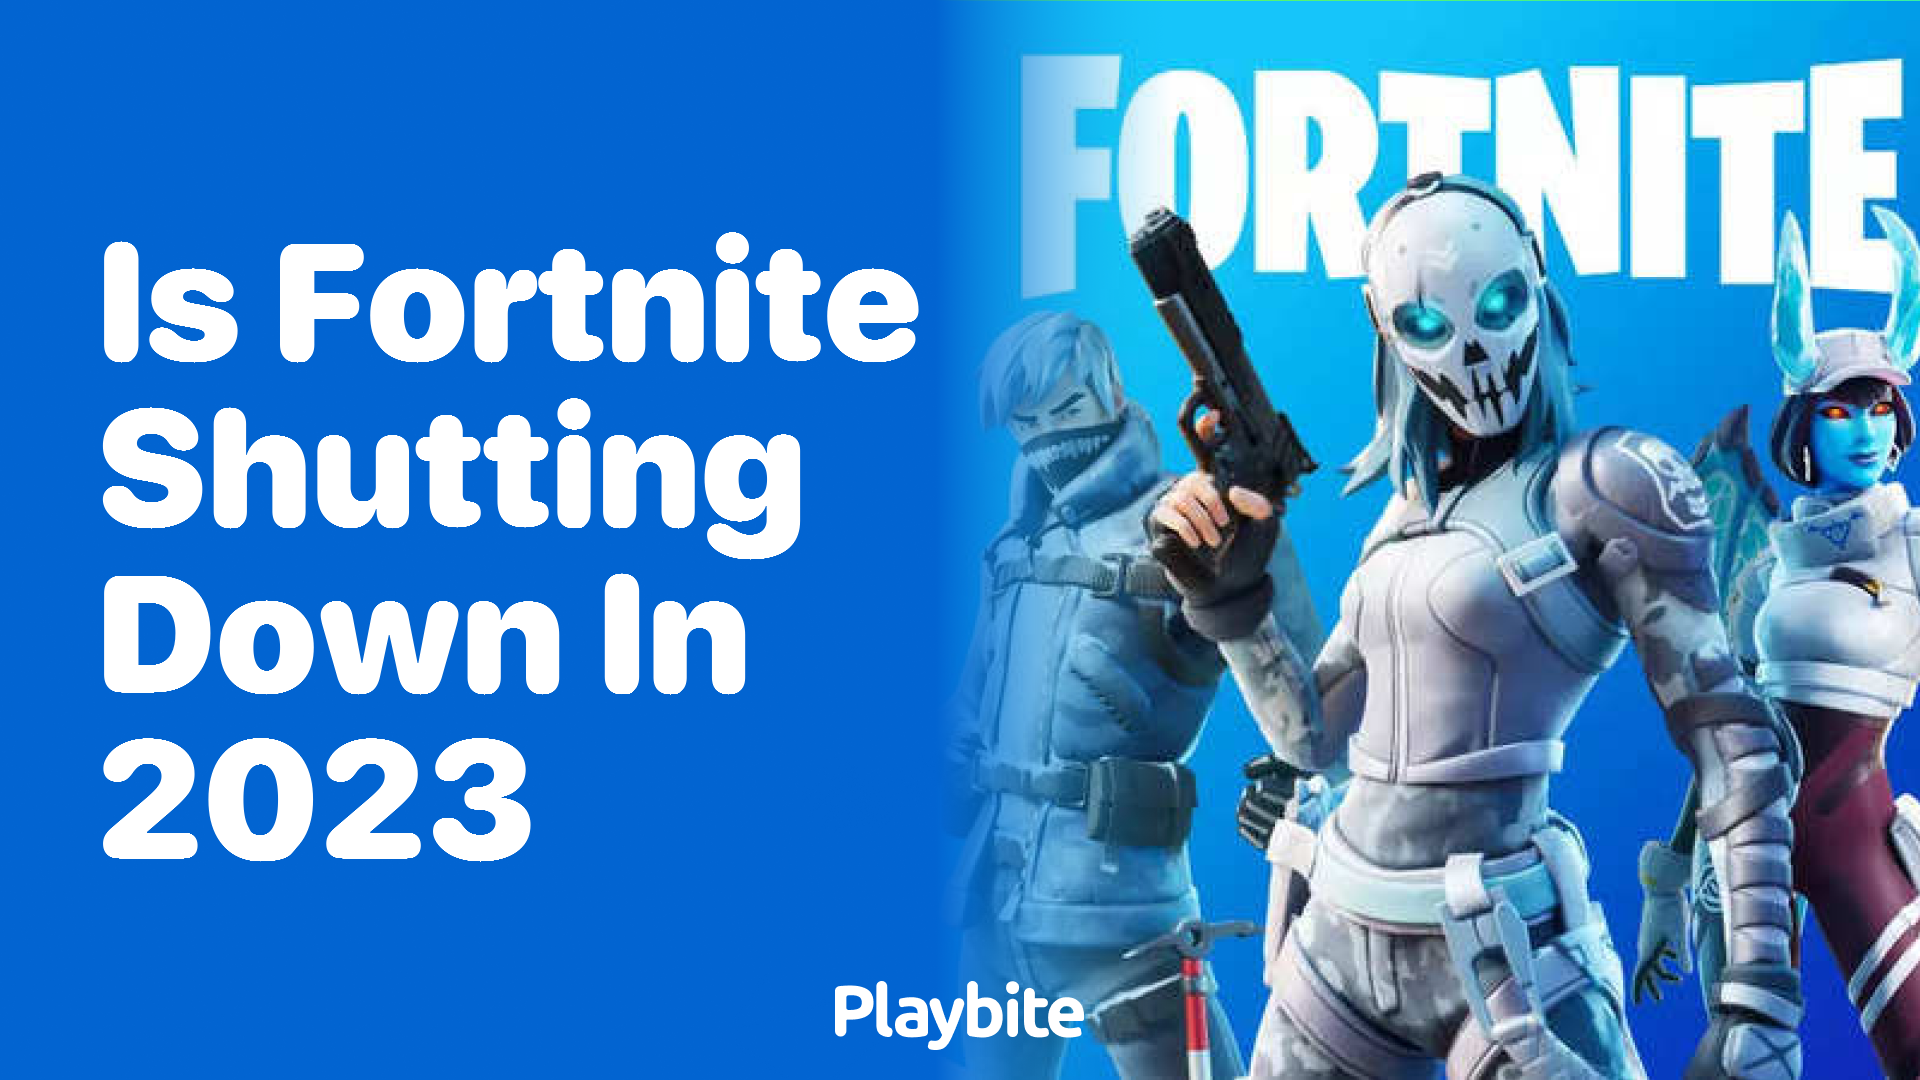 Is Fortnite Shutting Down in 2023? Find Out Here!